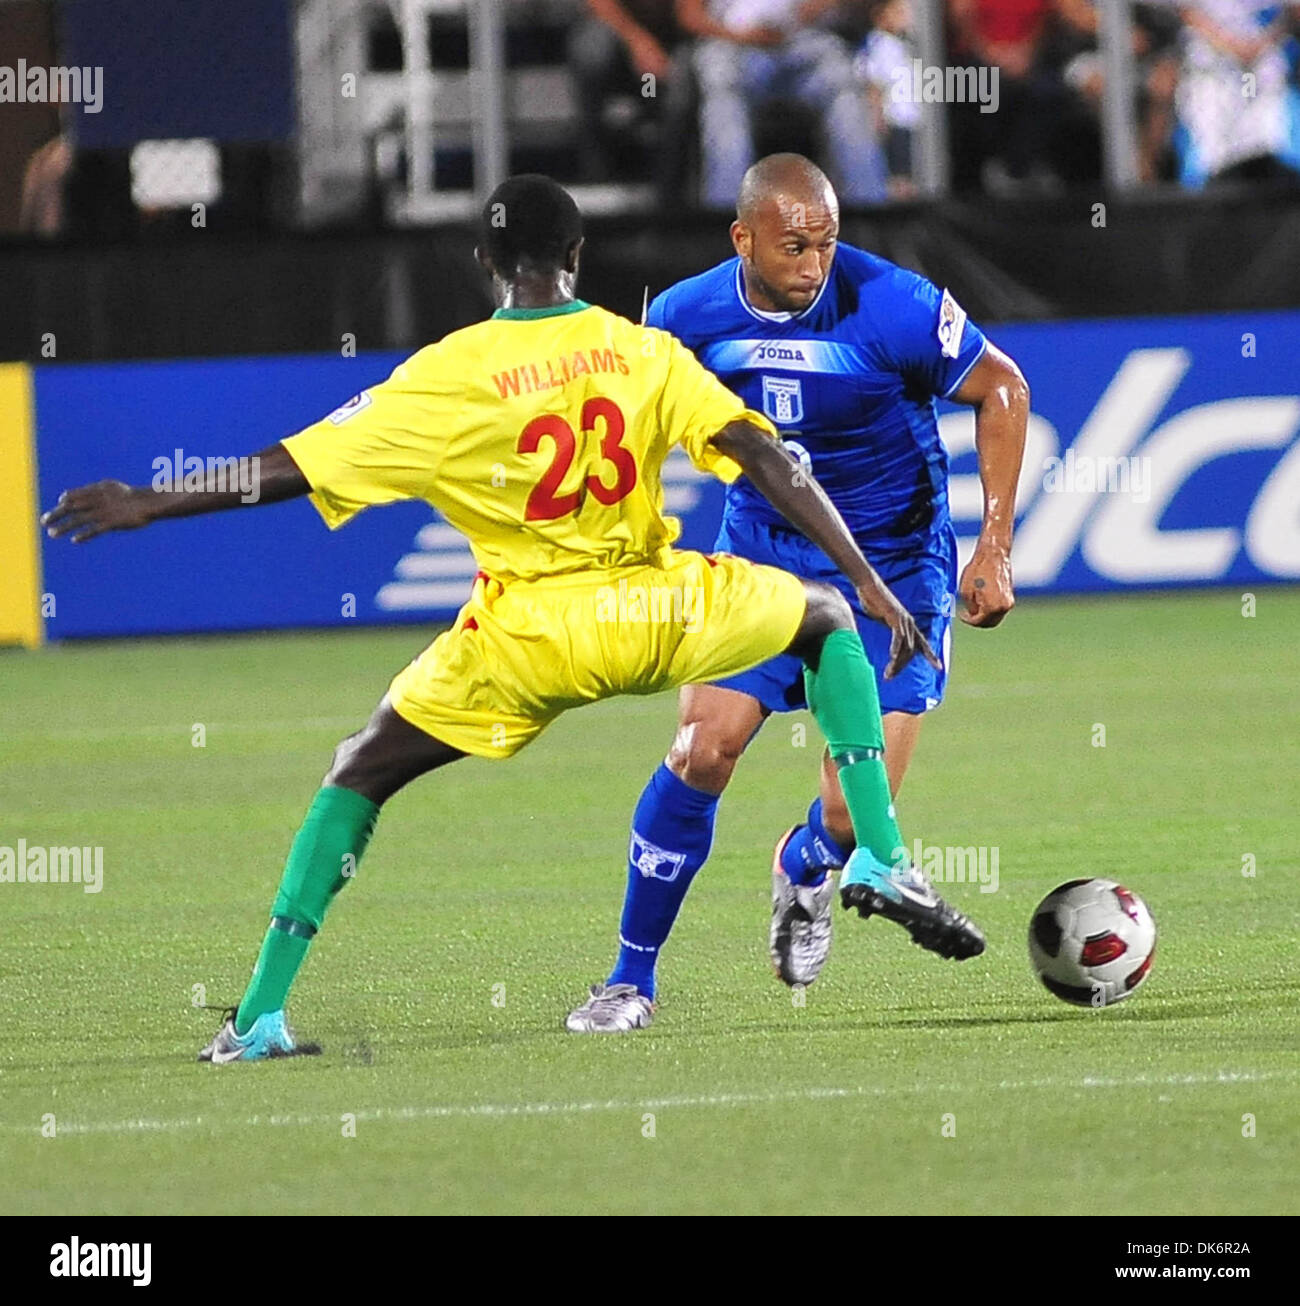 June 10, 2011 - Miami, FL, U.S. - June 10, 2011 - Miami, Florida, U.S  - Victor Bernardez (5), right, from Honduras vies for the ball against Junior Williams (23), left, of Grenada in the first half of a CONCACAF Gold Cup soccer match at Florida International University in Miami, Florida, Friday June 10, 2011. (Credit Image: © Gaston De Cardenas/ZUMAPRESS.com) Stock Photo